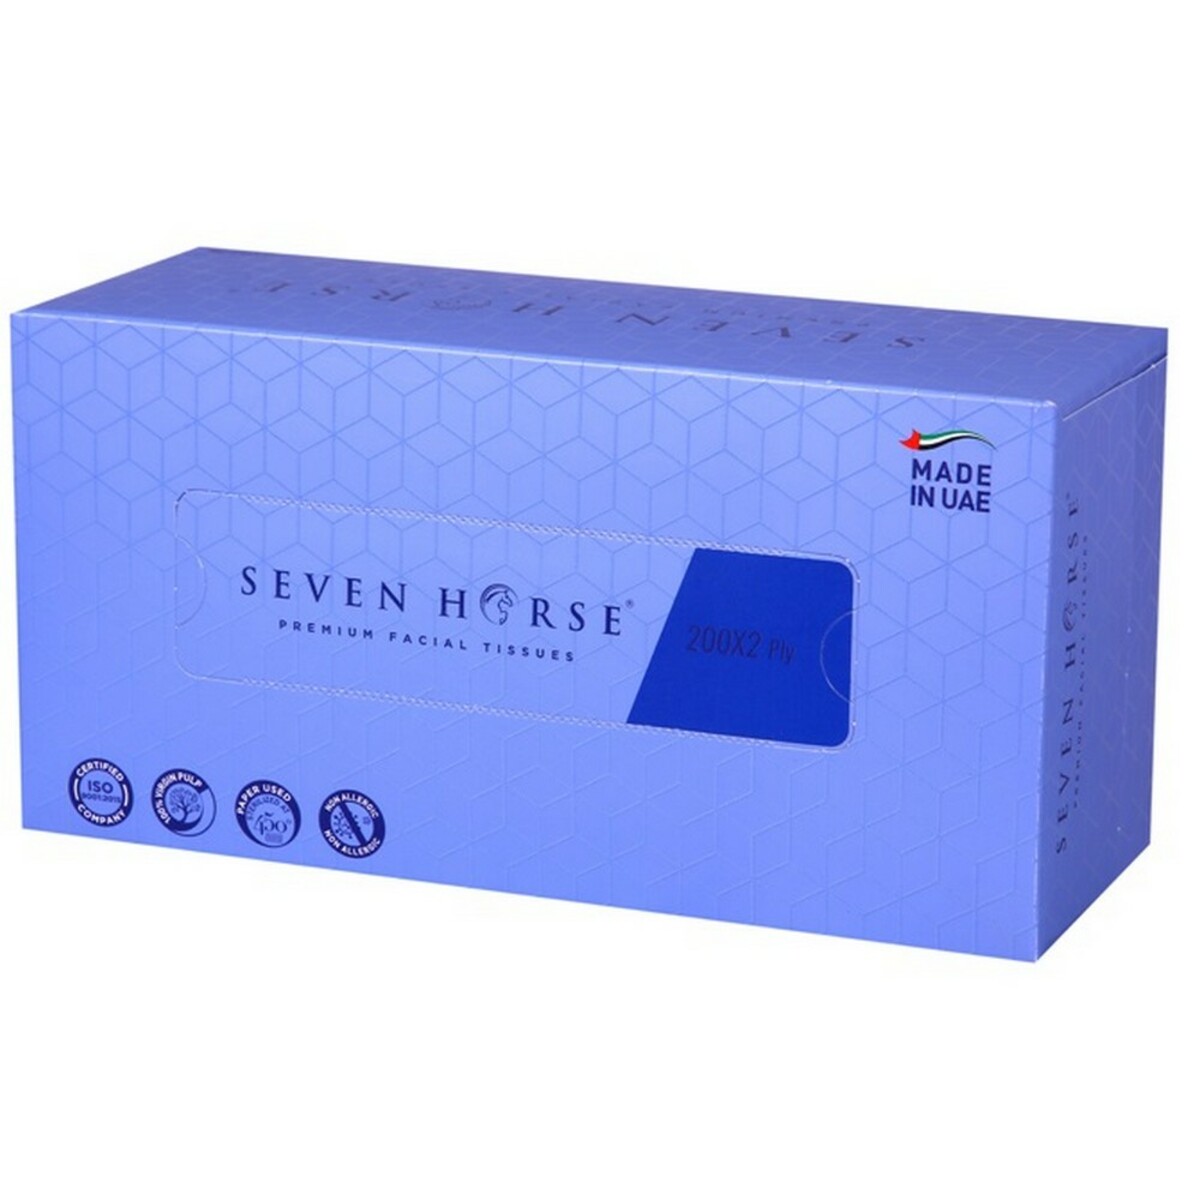 Seven Horse� Face Tissue 2 PLY 200 Pulls